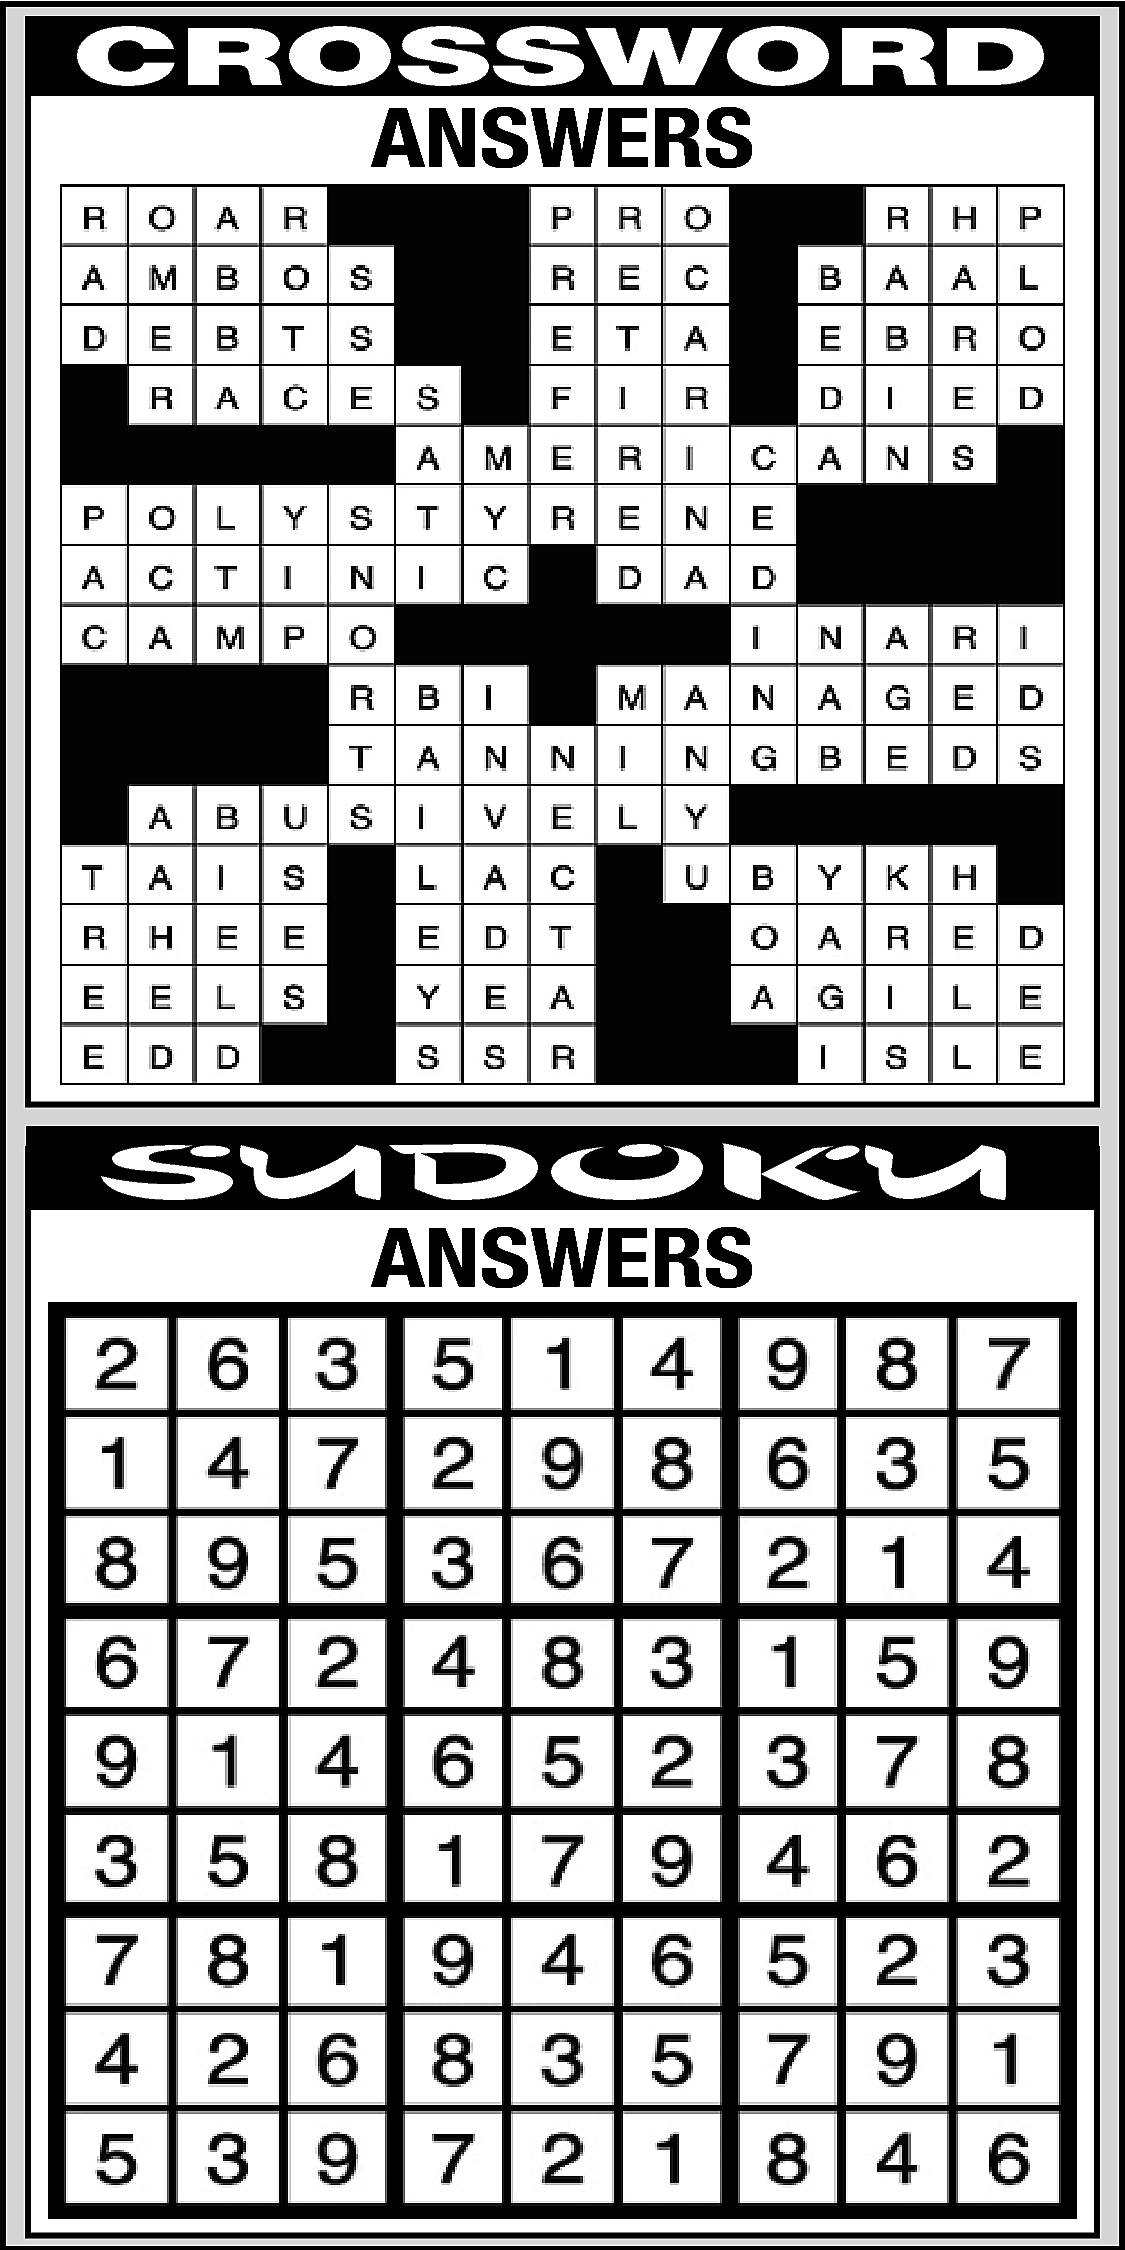 CROSSWORD <br>ANSWERS <br> <br>SUDOKU <br>ANSWERS  CROSSWORD  ANSWERS    SUDOKU  ANSWERS    